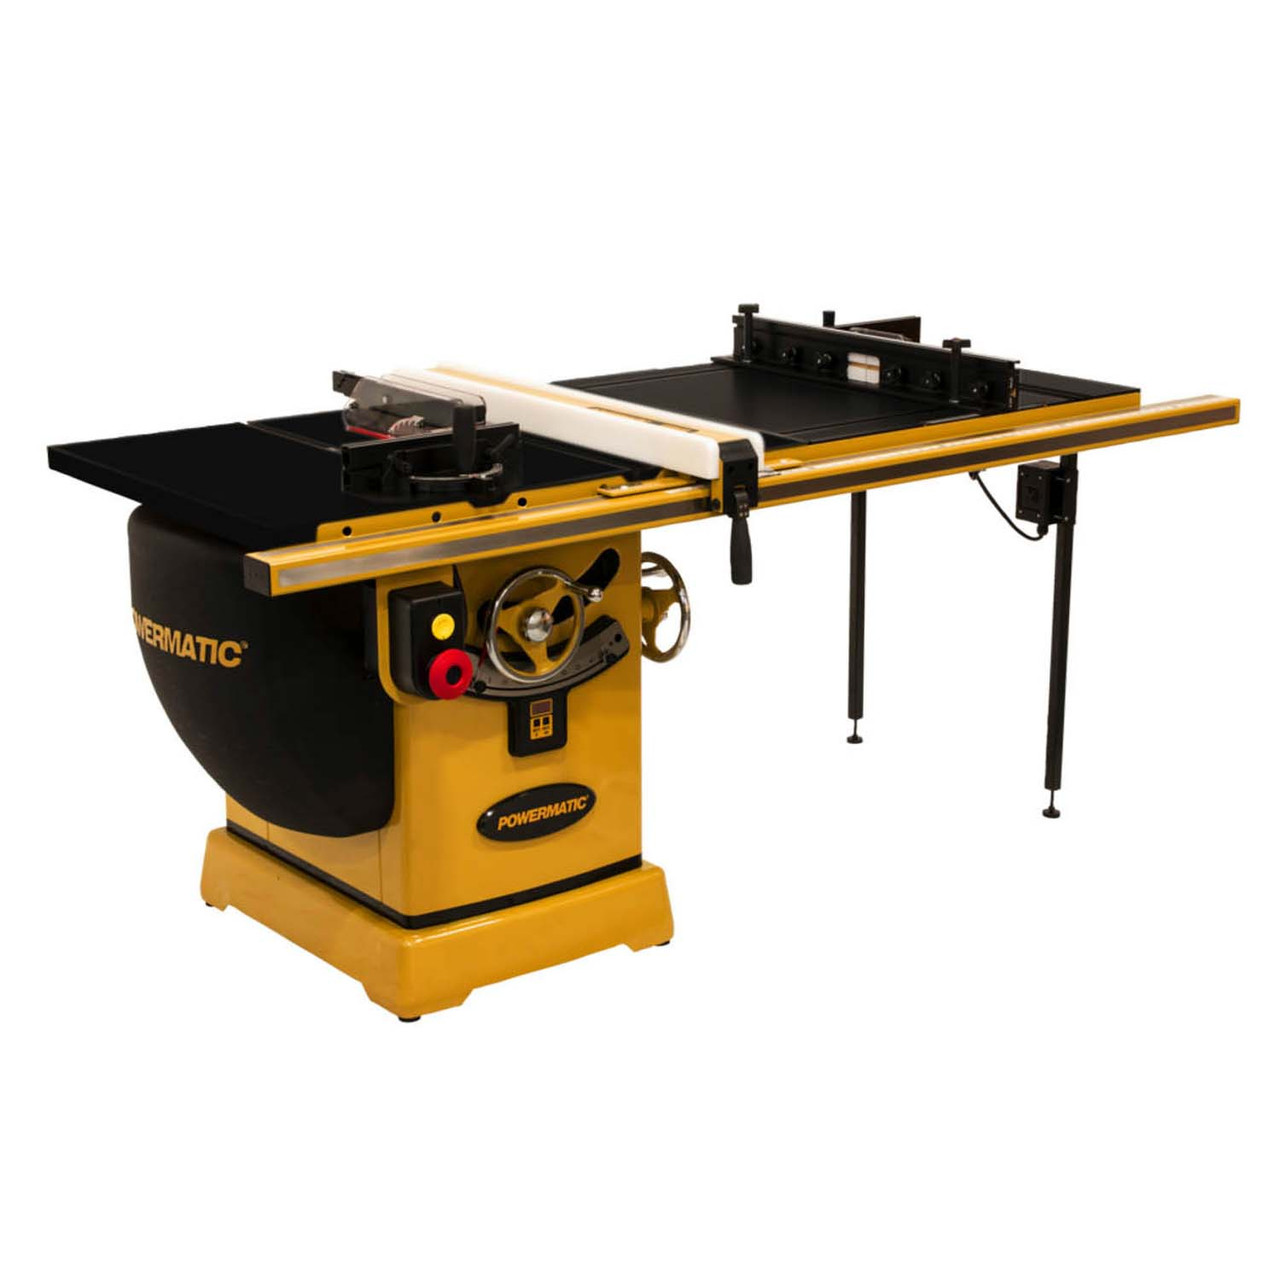 Powermatic, PM1-PM25150WKT, PM2000T 10" Table Saw with ArmorGlide, 5HP 1PH 230V, 50" RIP